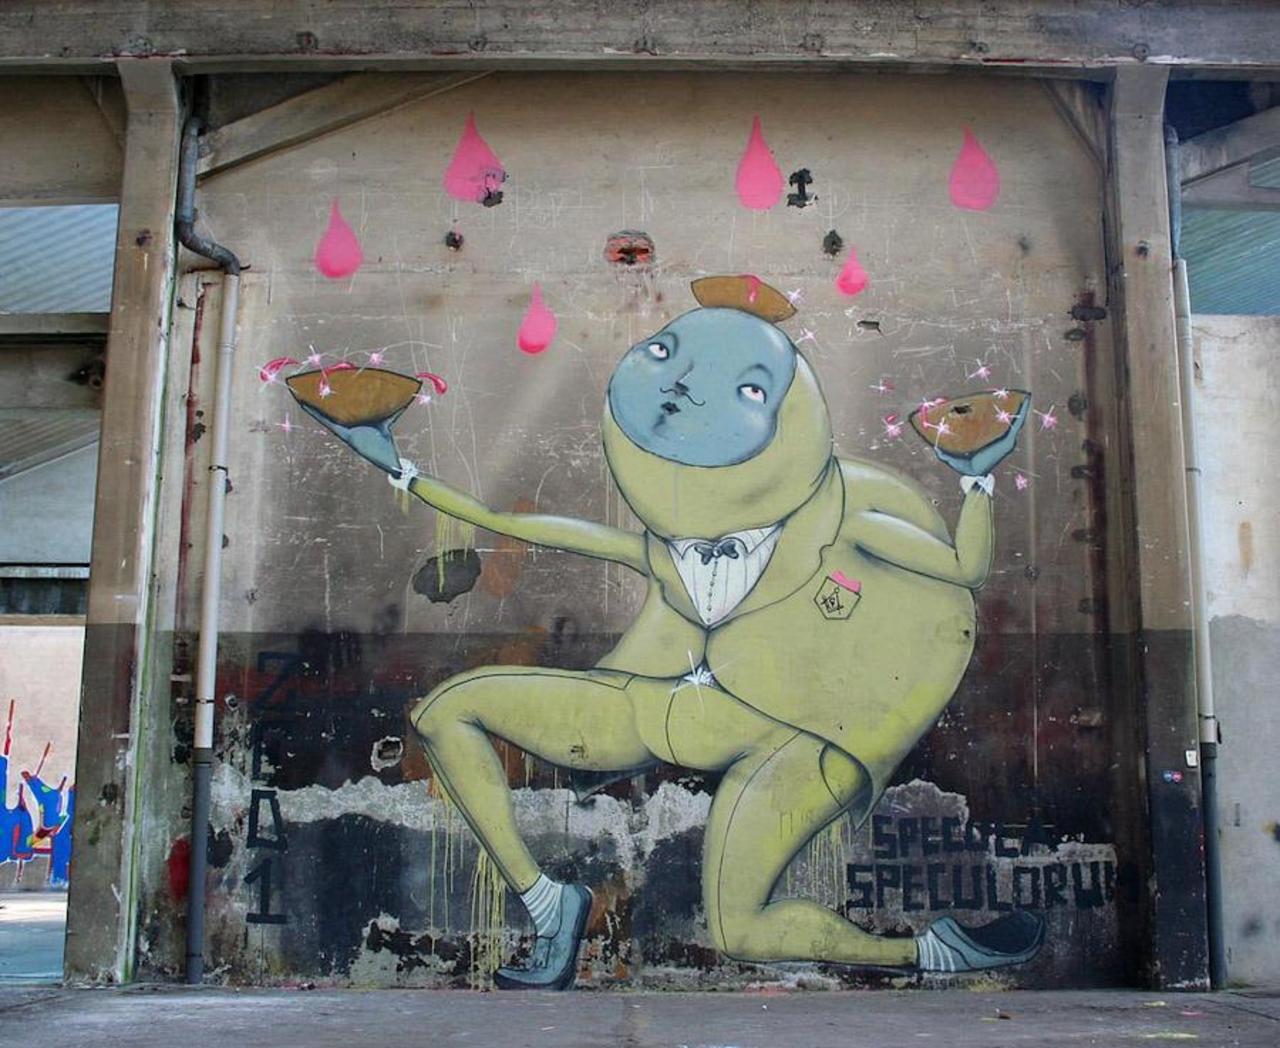 The streets of Italy are never dull. See this piece by Zed 1: http://bit.ly/Zed1Graff #Italy #streetart https://t.co/DfxPJ3KwG6